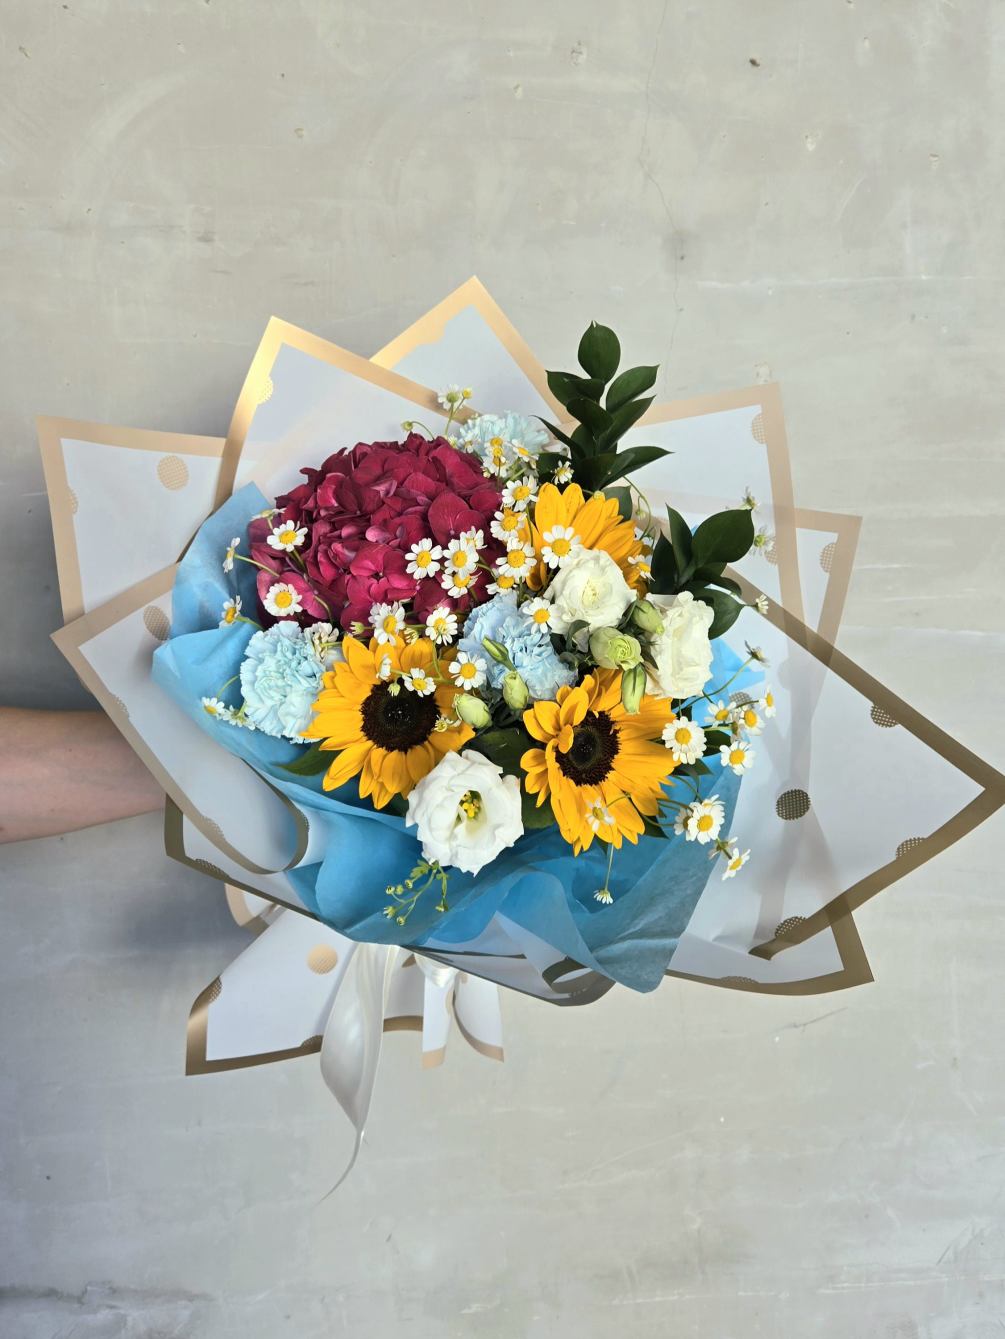 Beautiful bright bouquet with sunflowers,  hydrangea, carnations, lisianthus and daisies